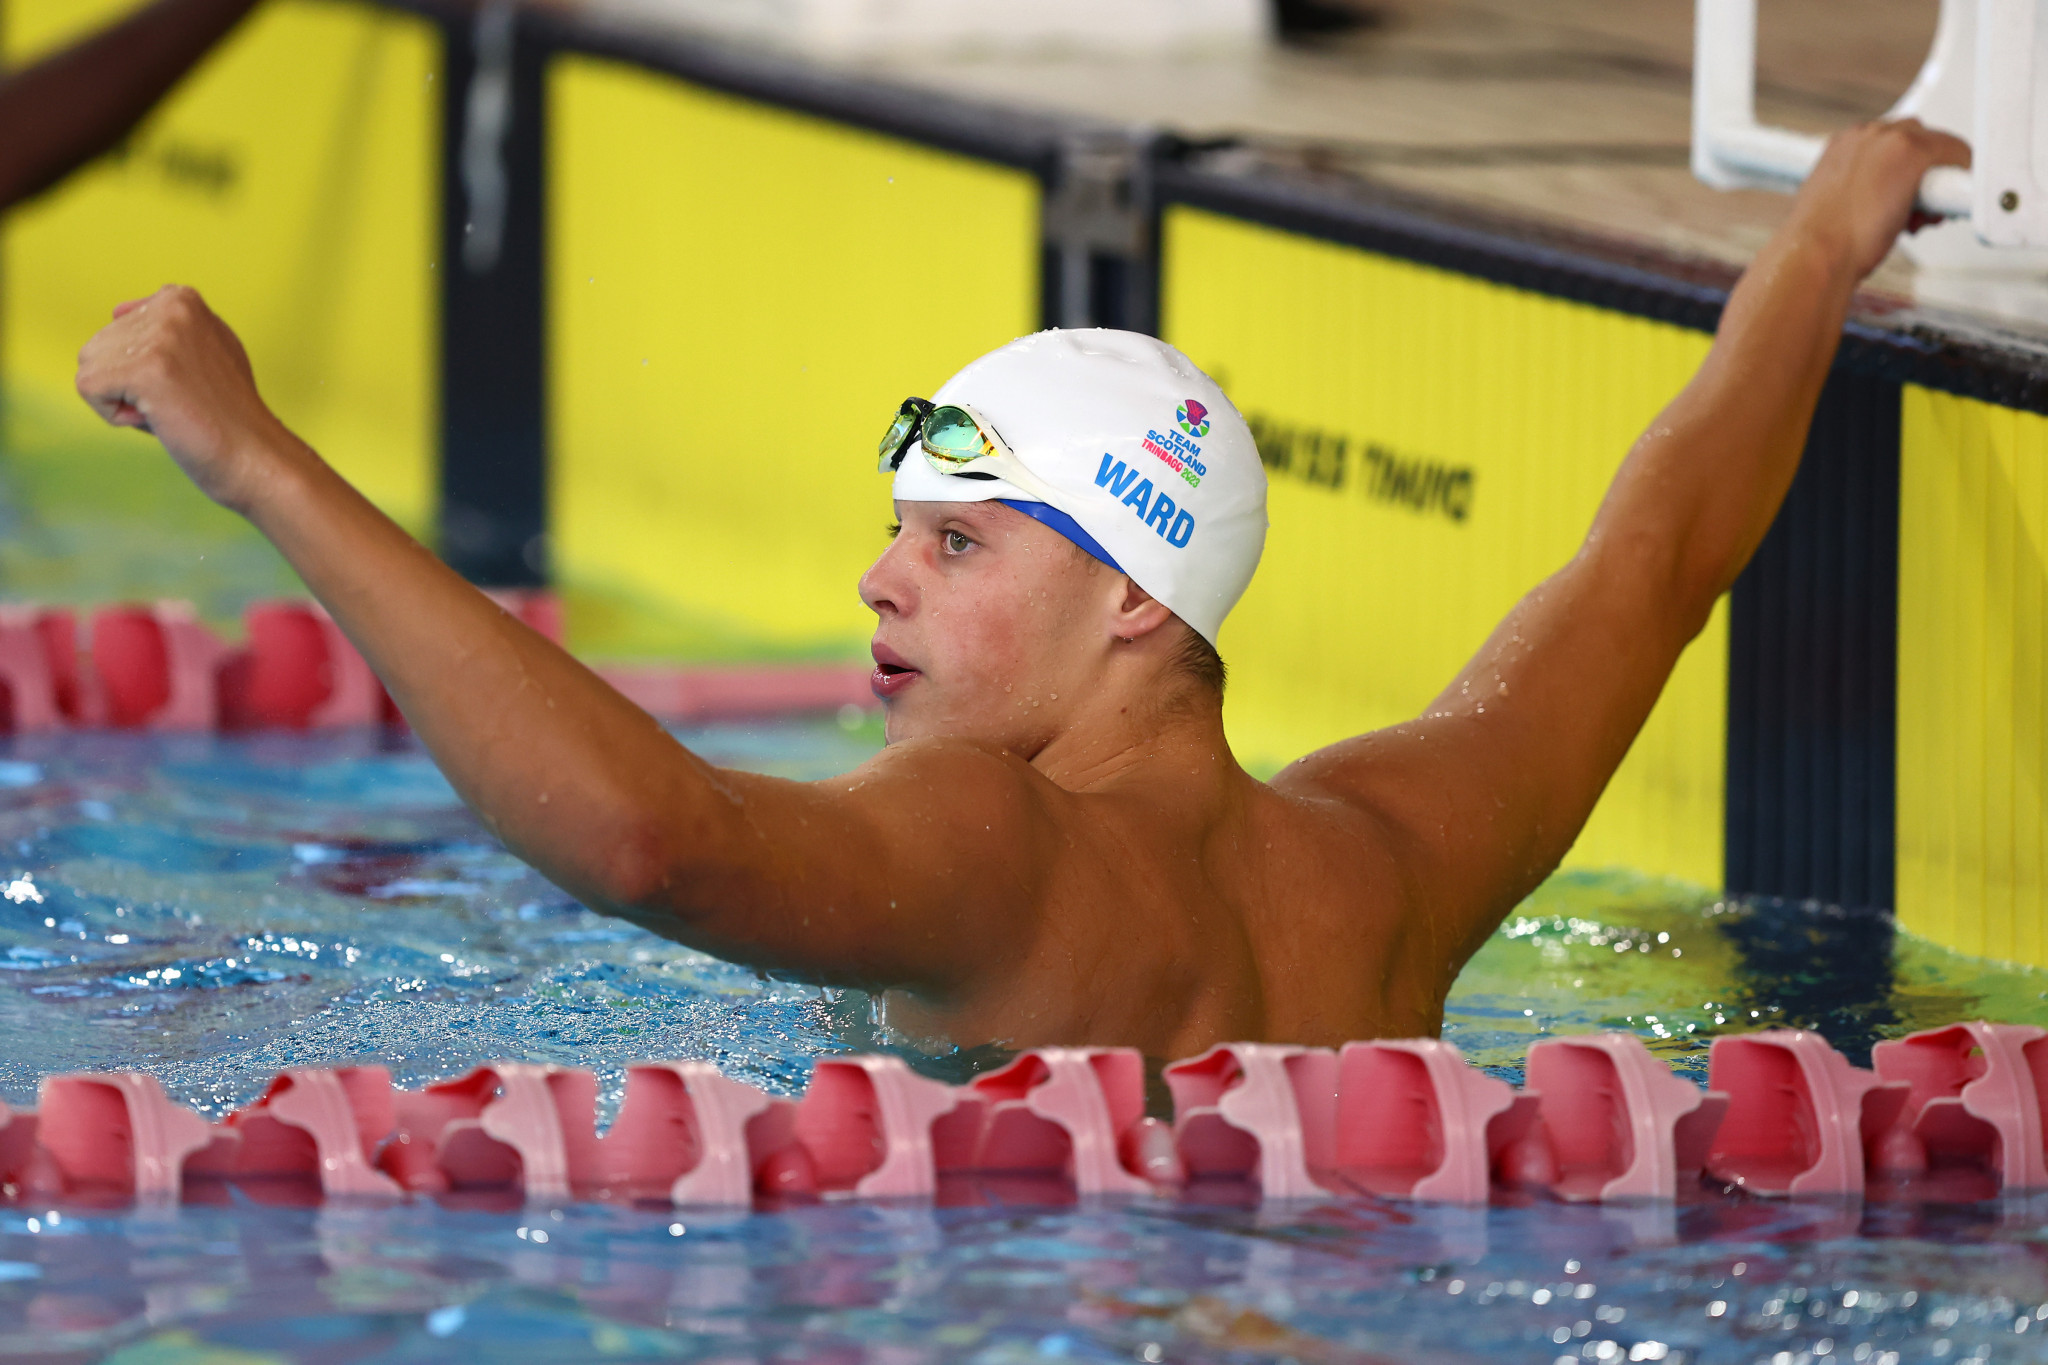 Matthew Ward of Scotland won his second gold medal at Trinbago 2023 in the men's 50m backstroke ©Getty Images